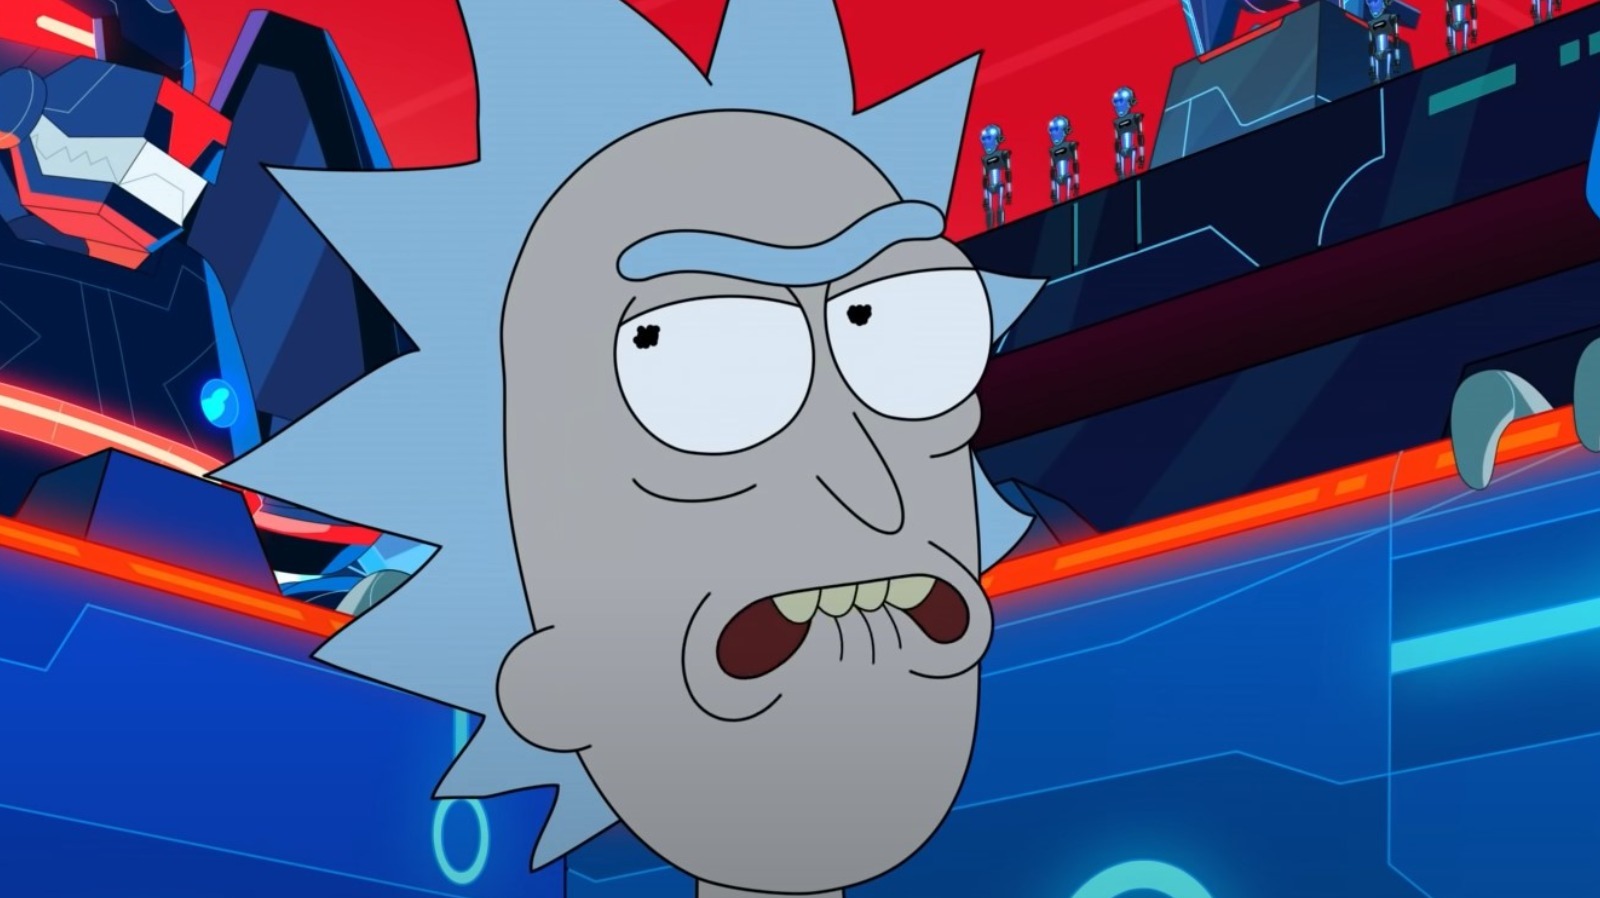 The Missing Gadget That Has Rick And Morty Fans Worried About Season 5